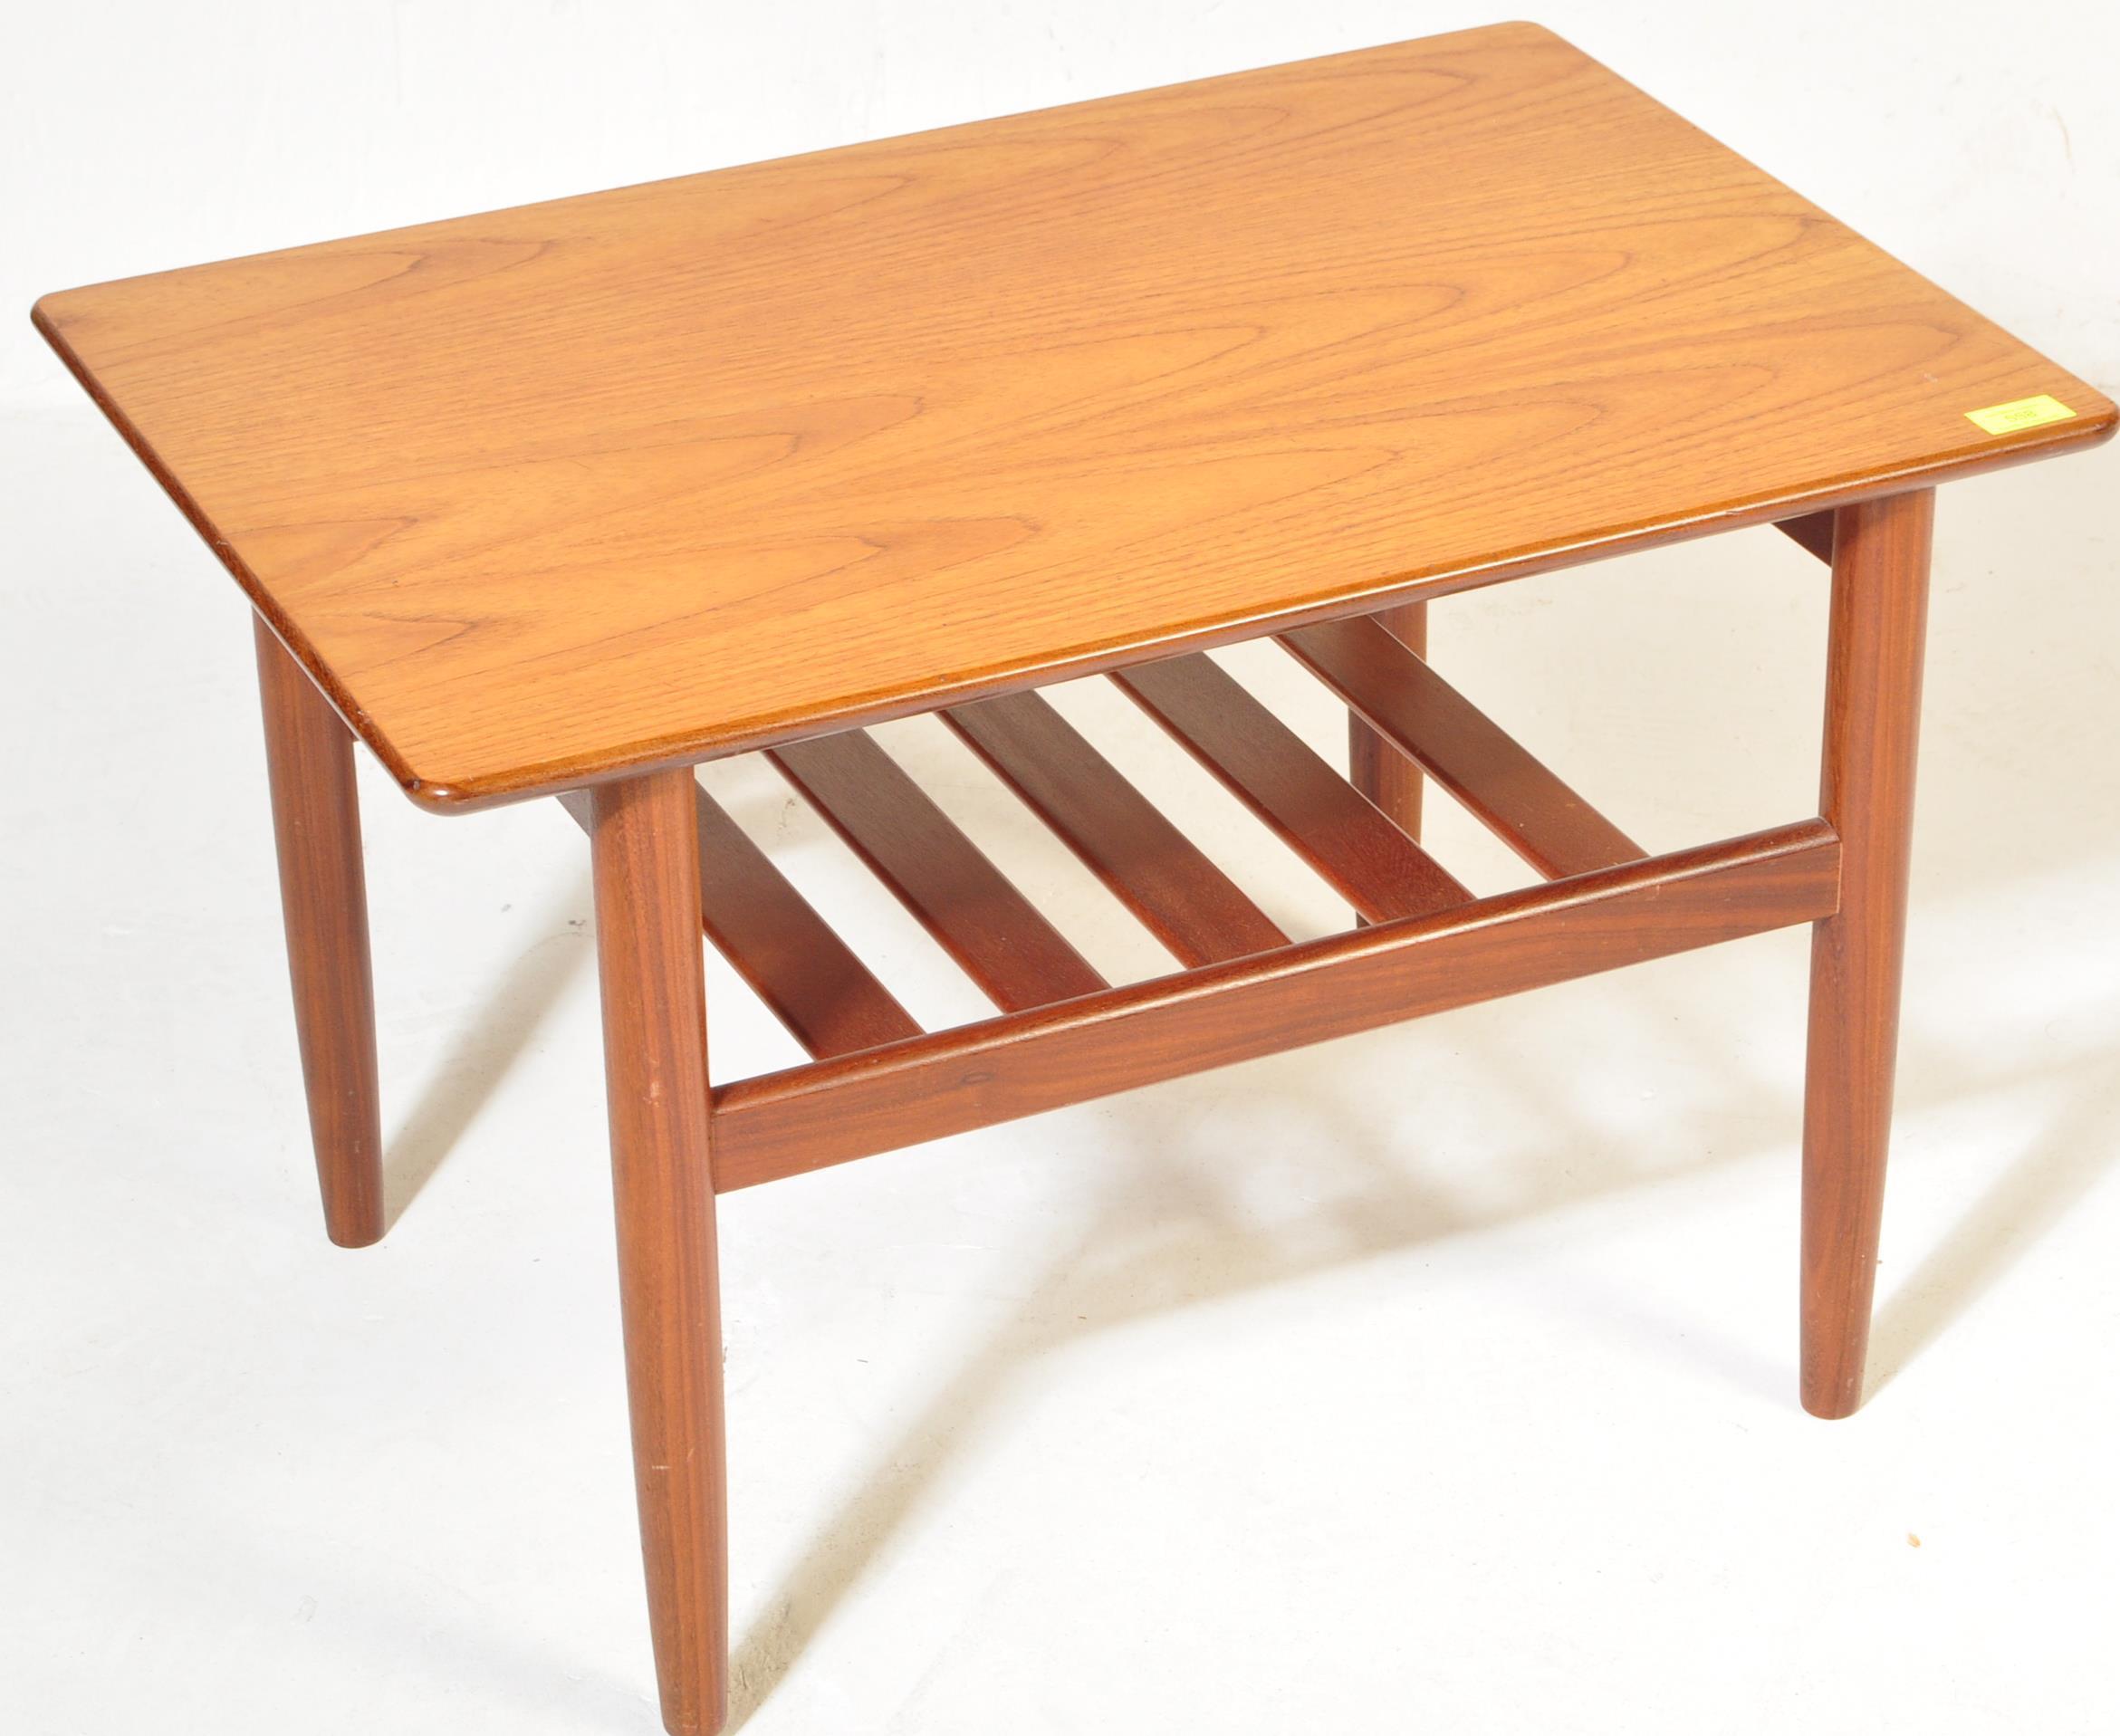 RETRO MID 20TH CENTURY TEAK TWO TIERED COFFEE TABLE - Image 2 of 4